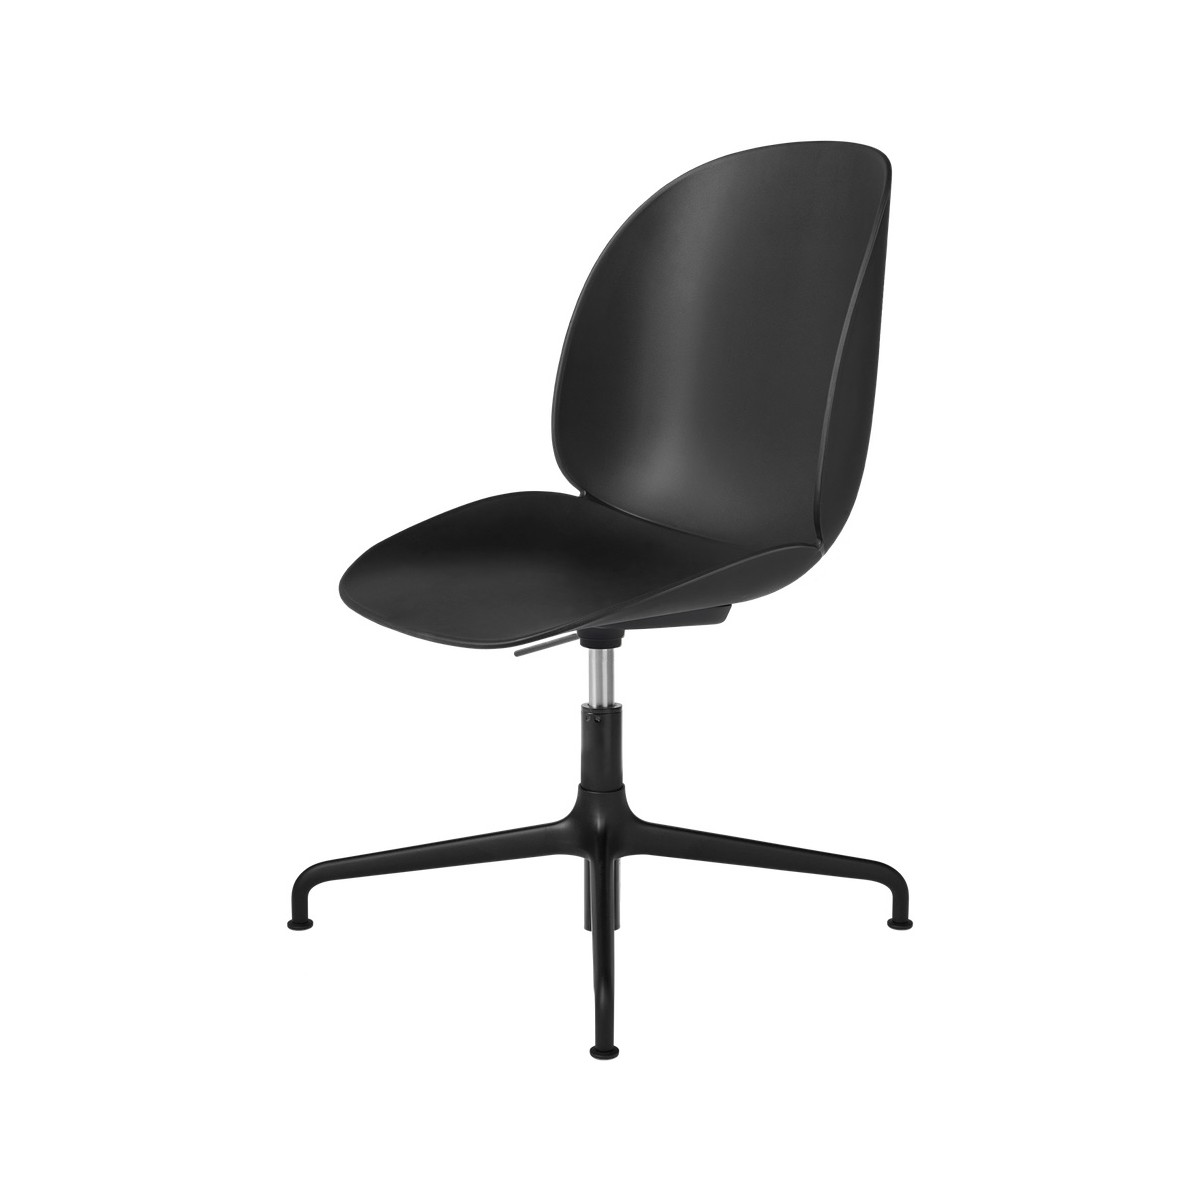 Beetle Meeting chair, Height Adjustable – Without castor – Black shell